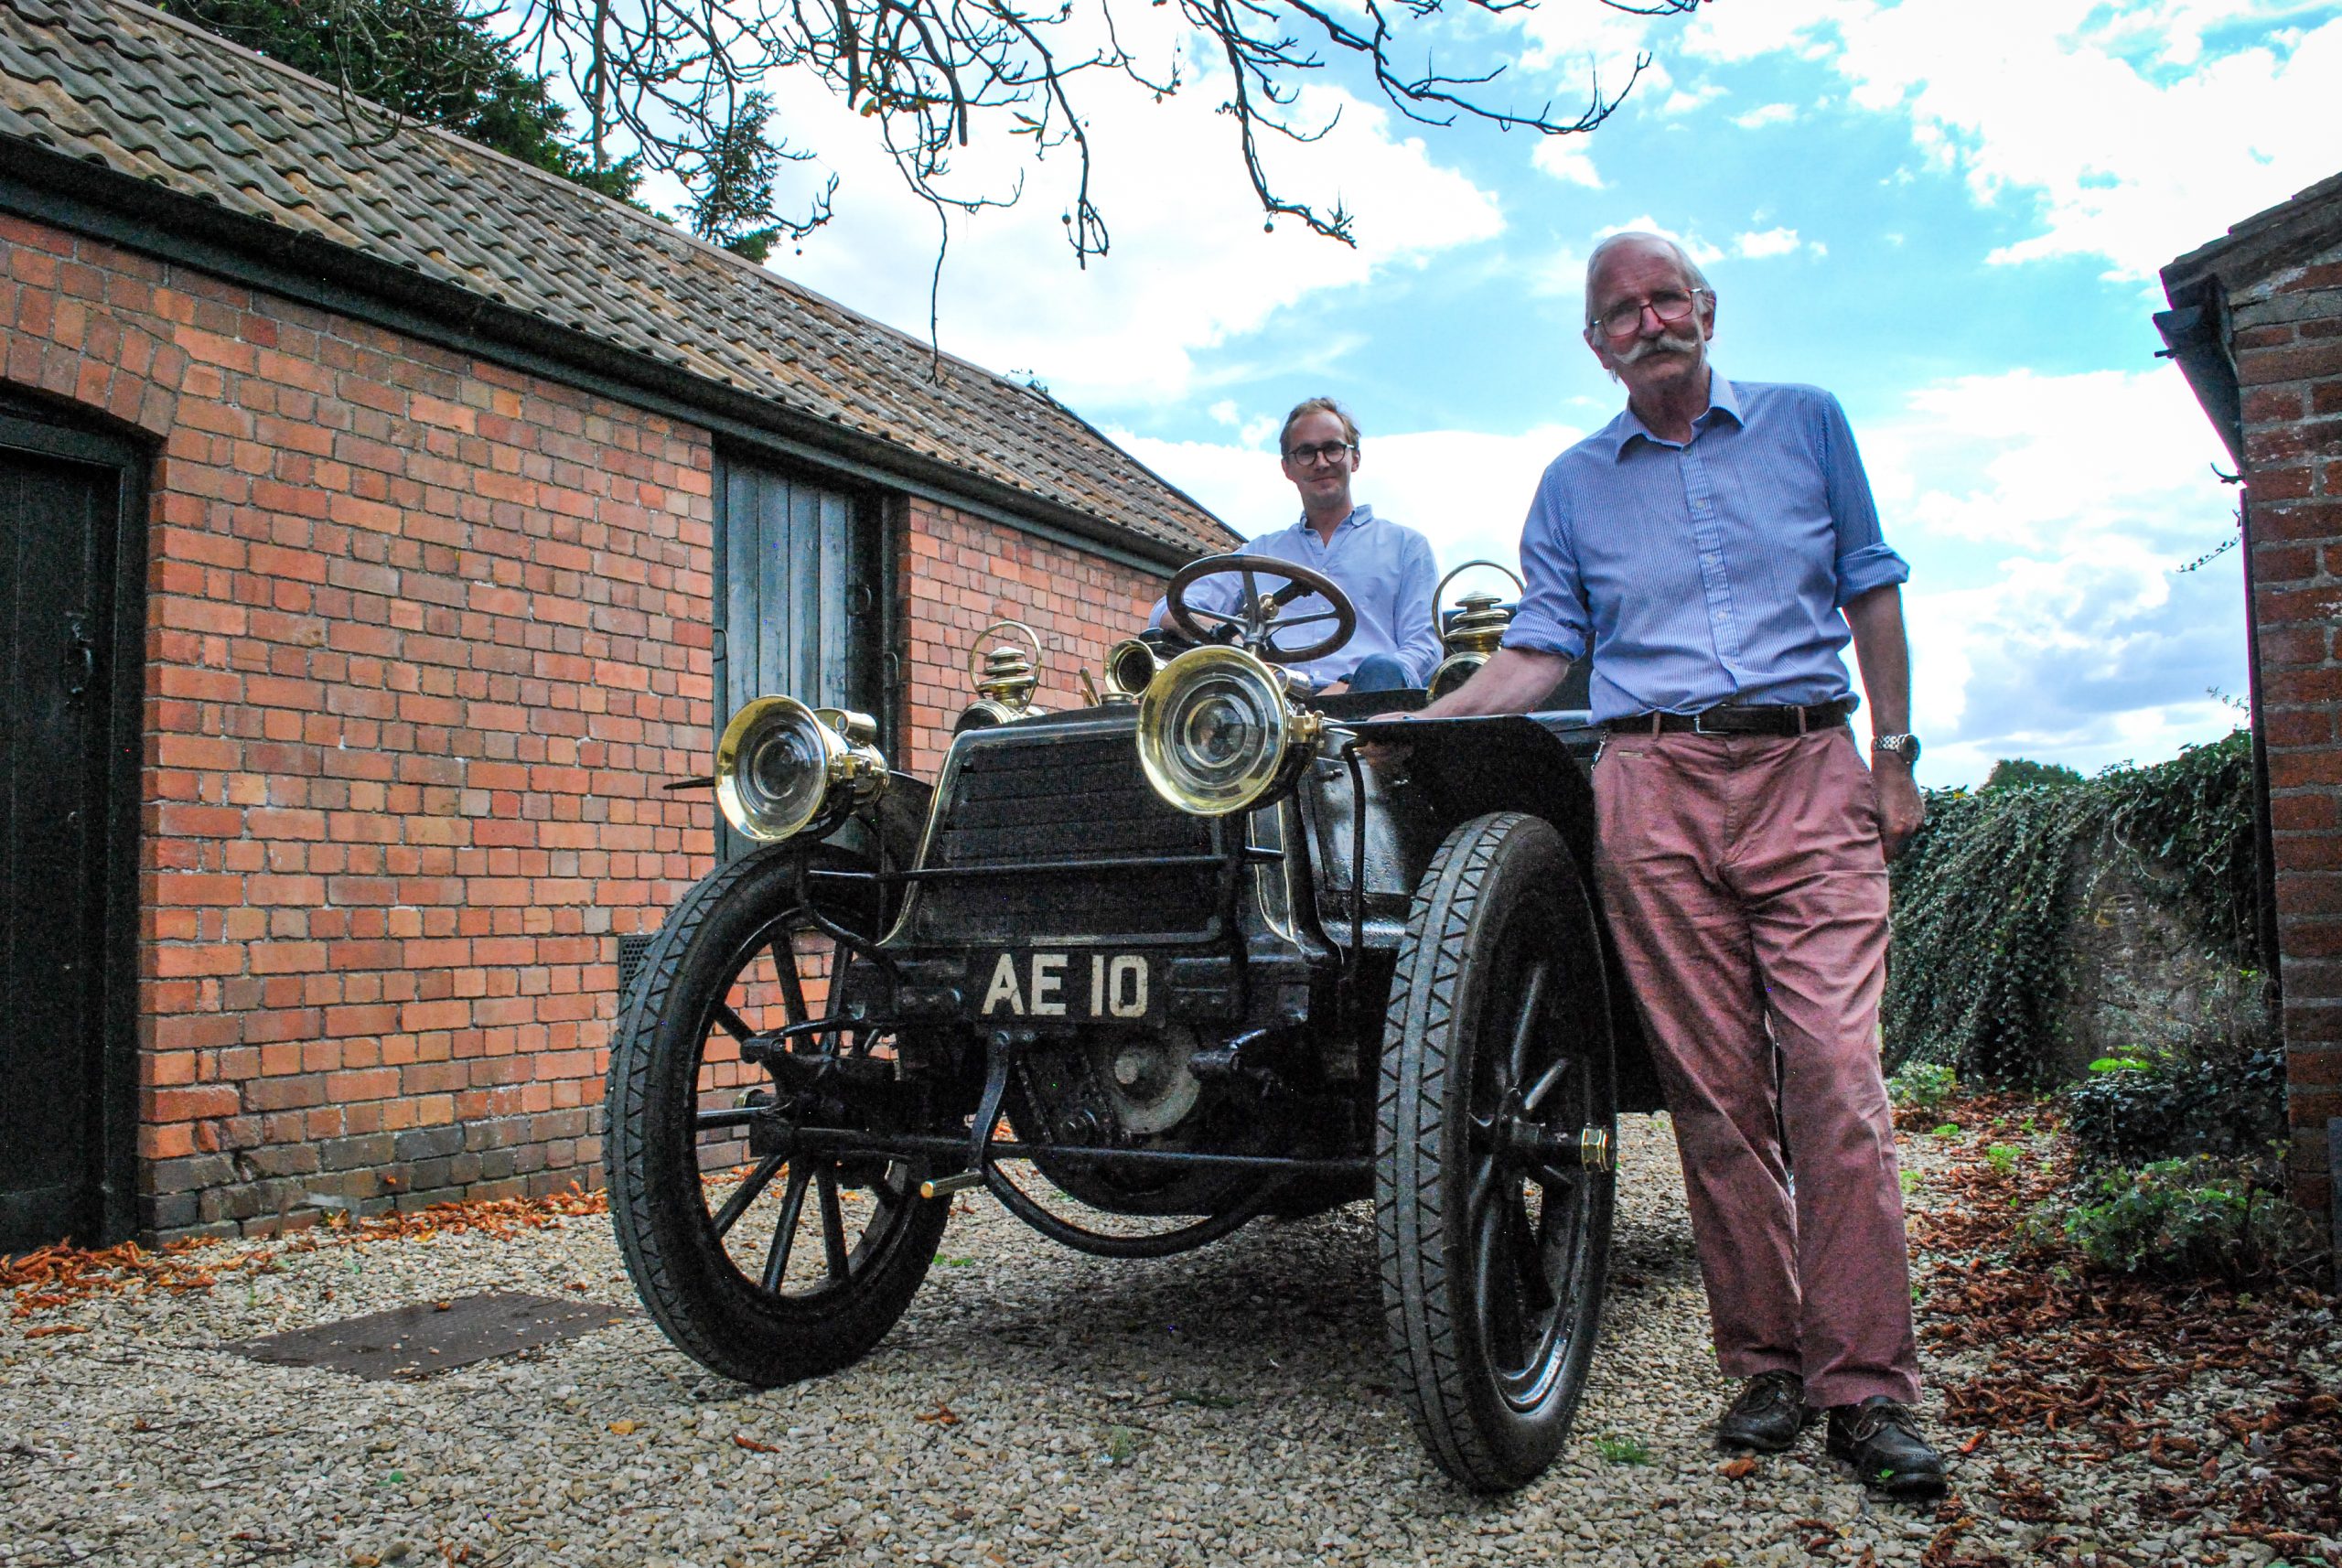 Veteran Car Run competitor is keeping it in the family